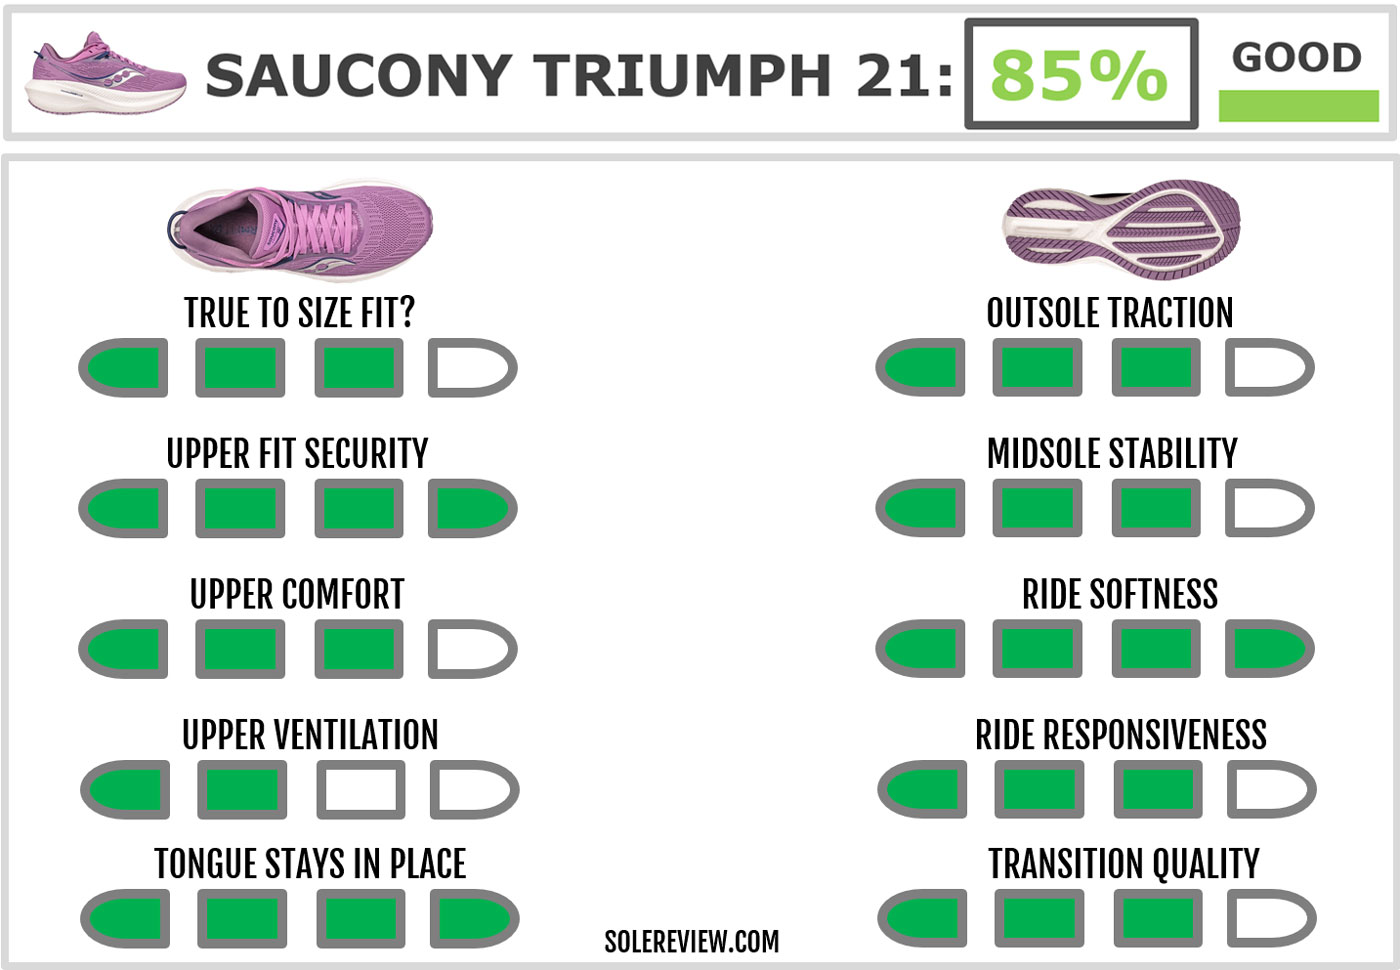 The overall score of the Saucony Triumph 21.